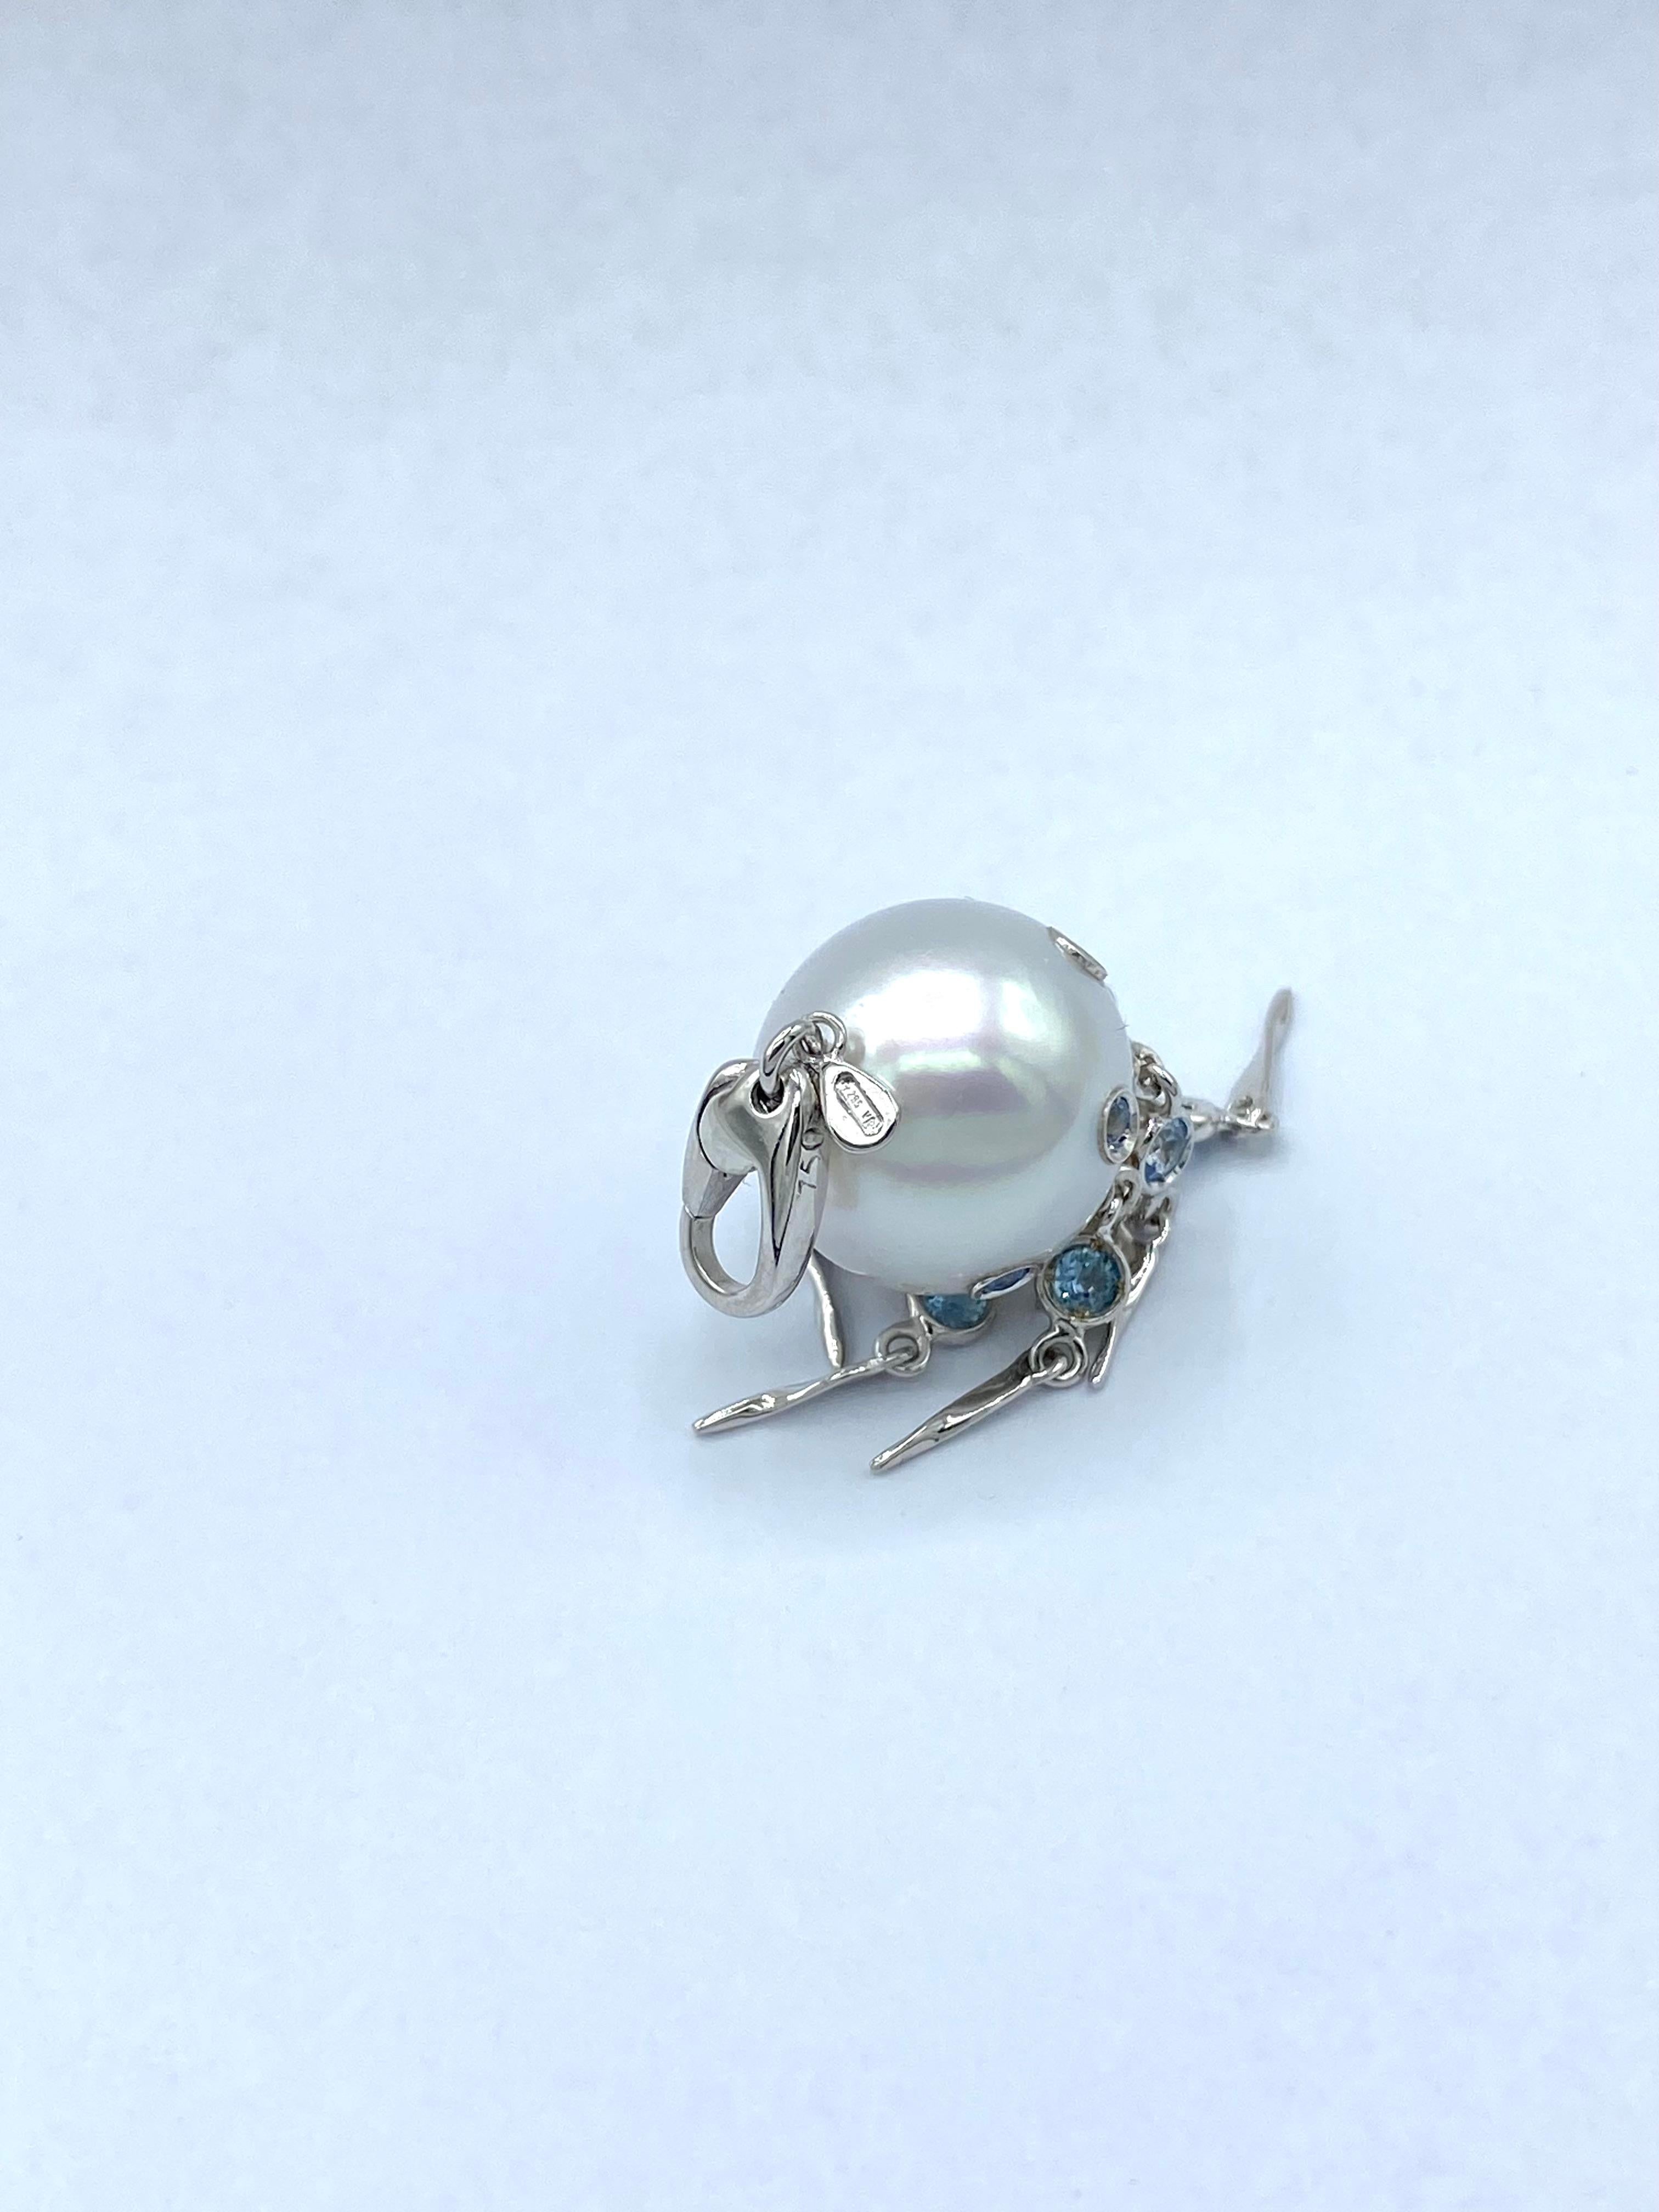 Aquamarine Australian Pearl 18Kt White Gold Jellyfish Pendant/Necklace or Charm  In New Condition For Sale In Bussolengo, Verona